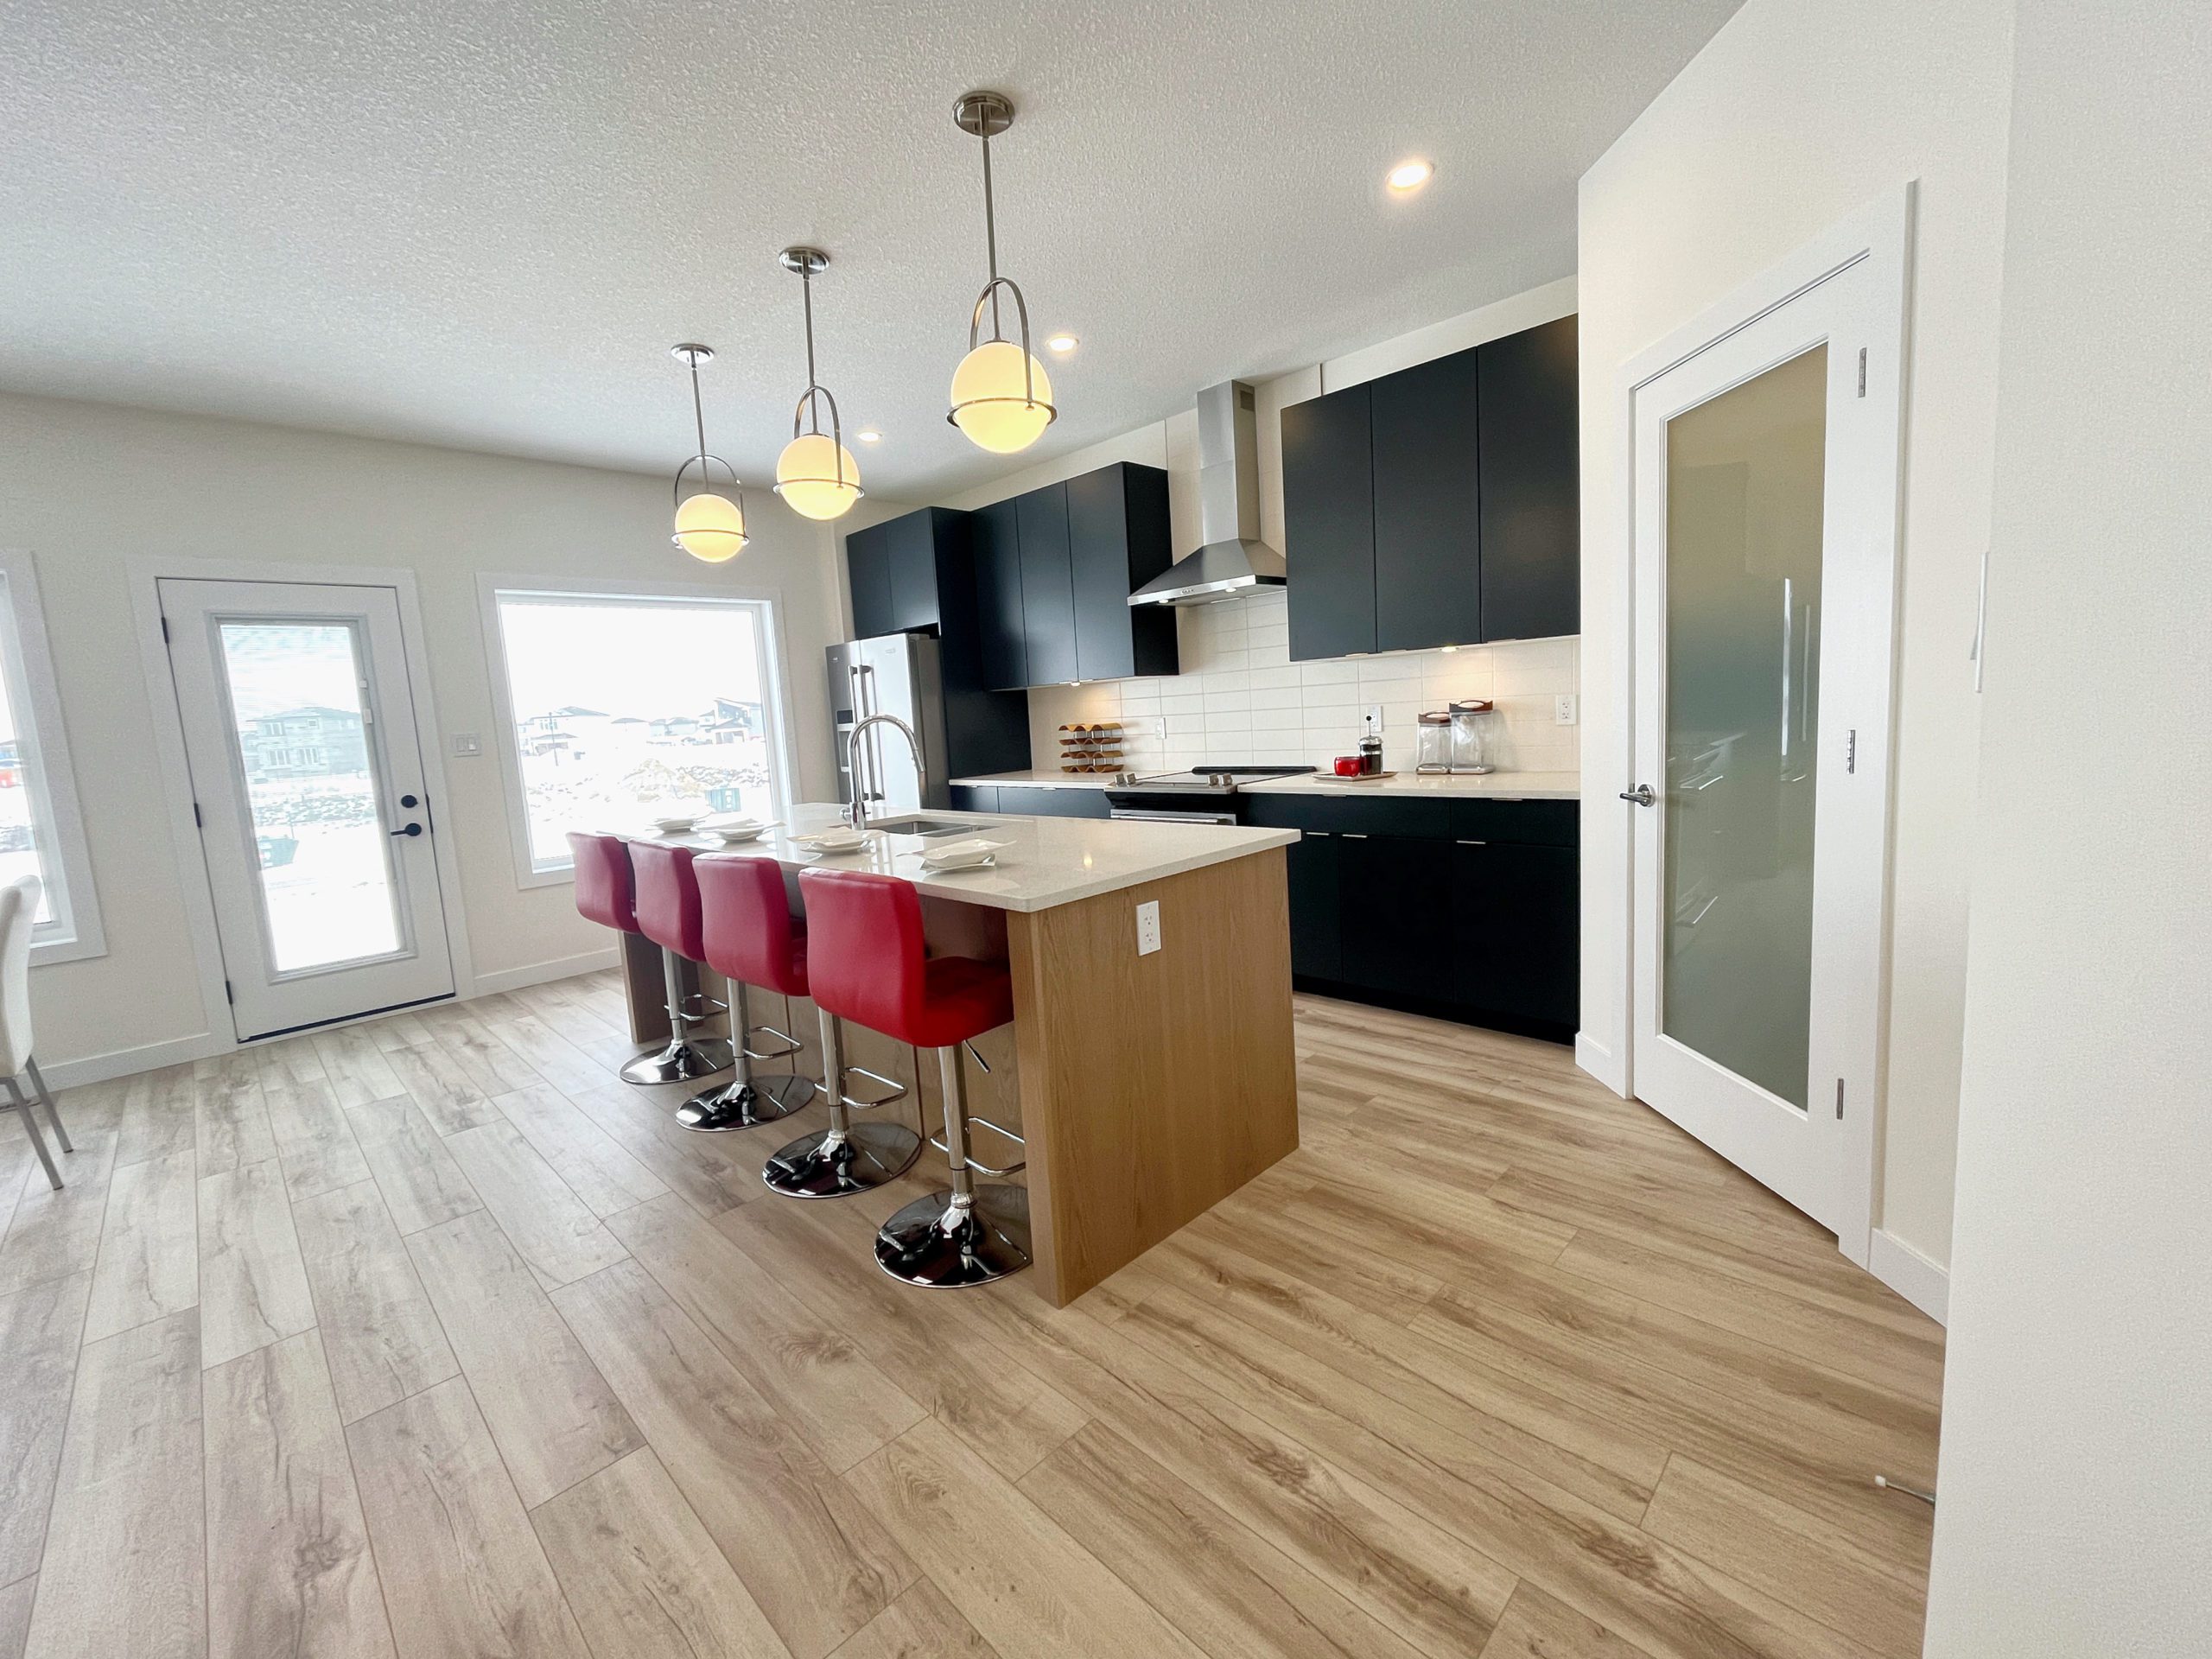 Shows the kitchen island and four counter height stools.